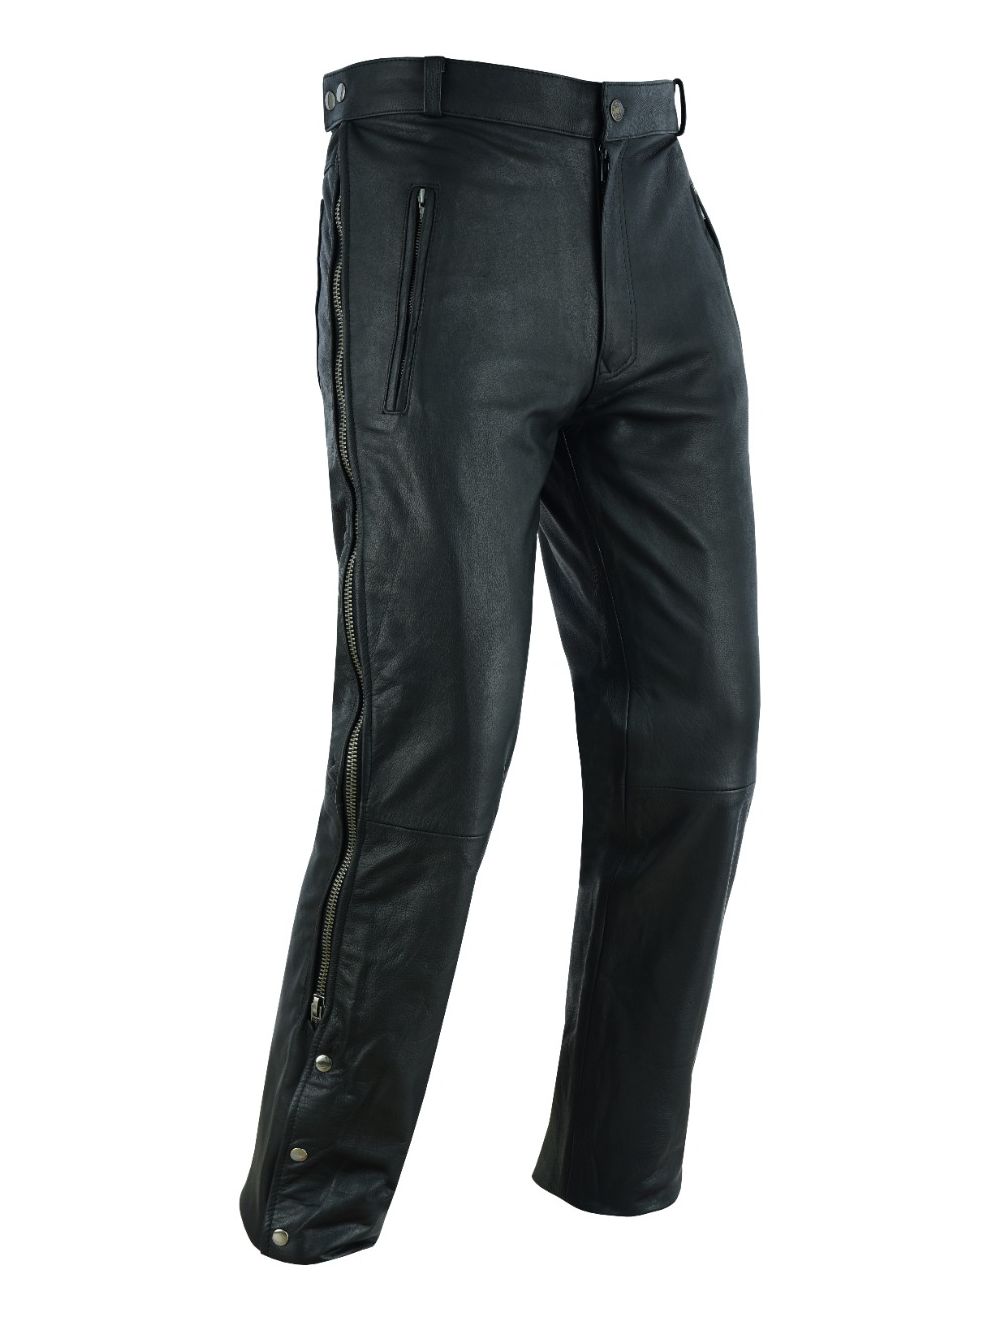 Mens Chap Style Leather Pants With Zipper